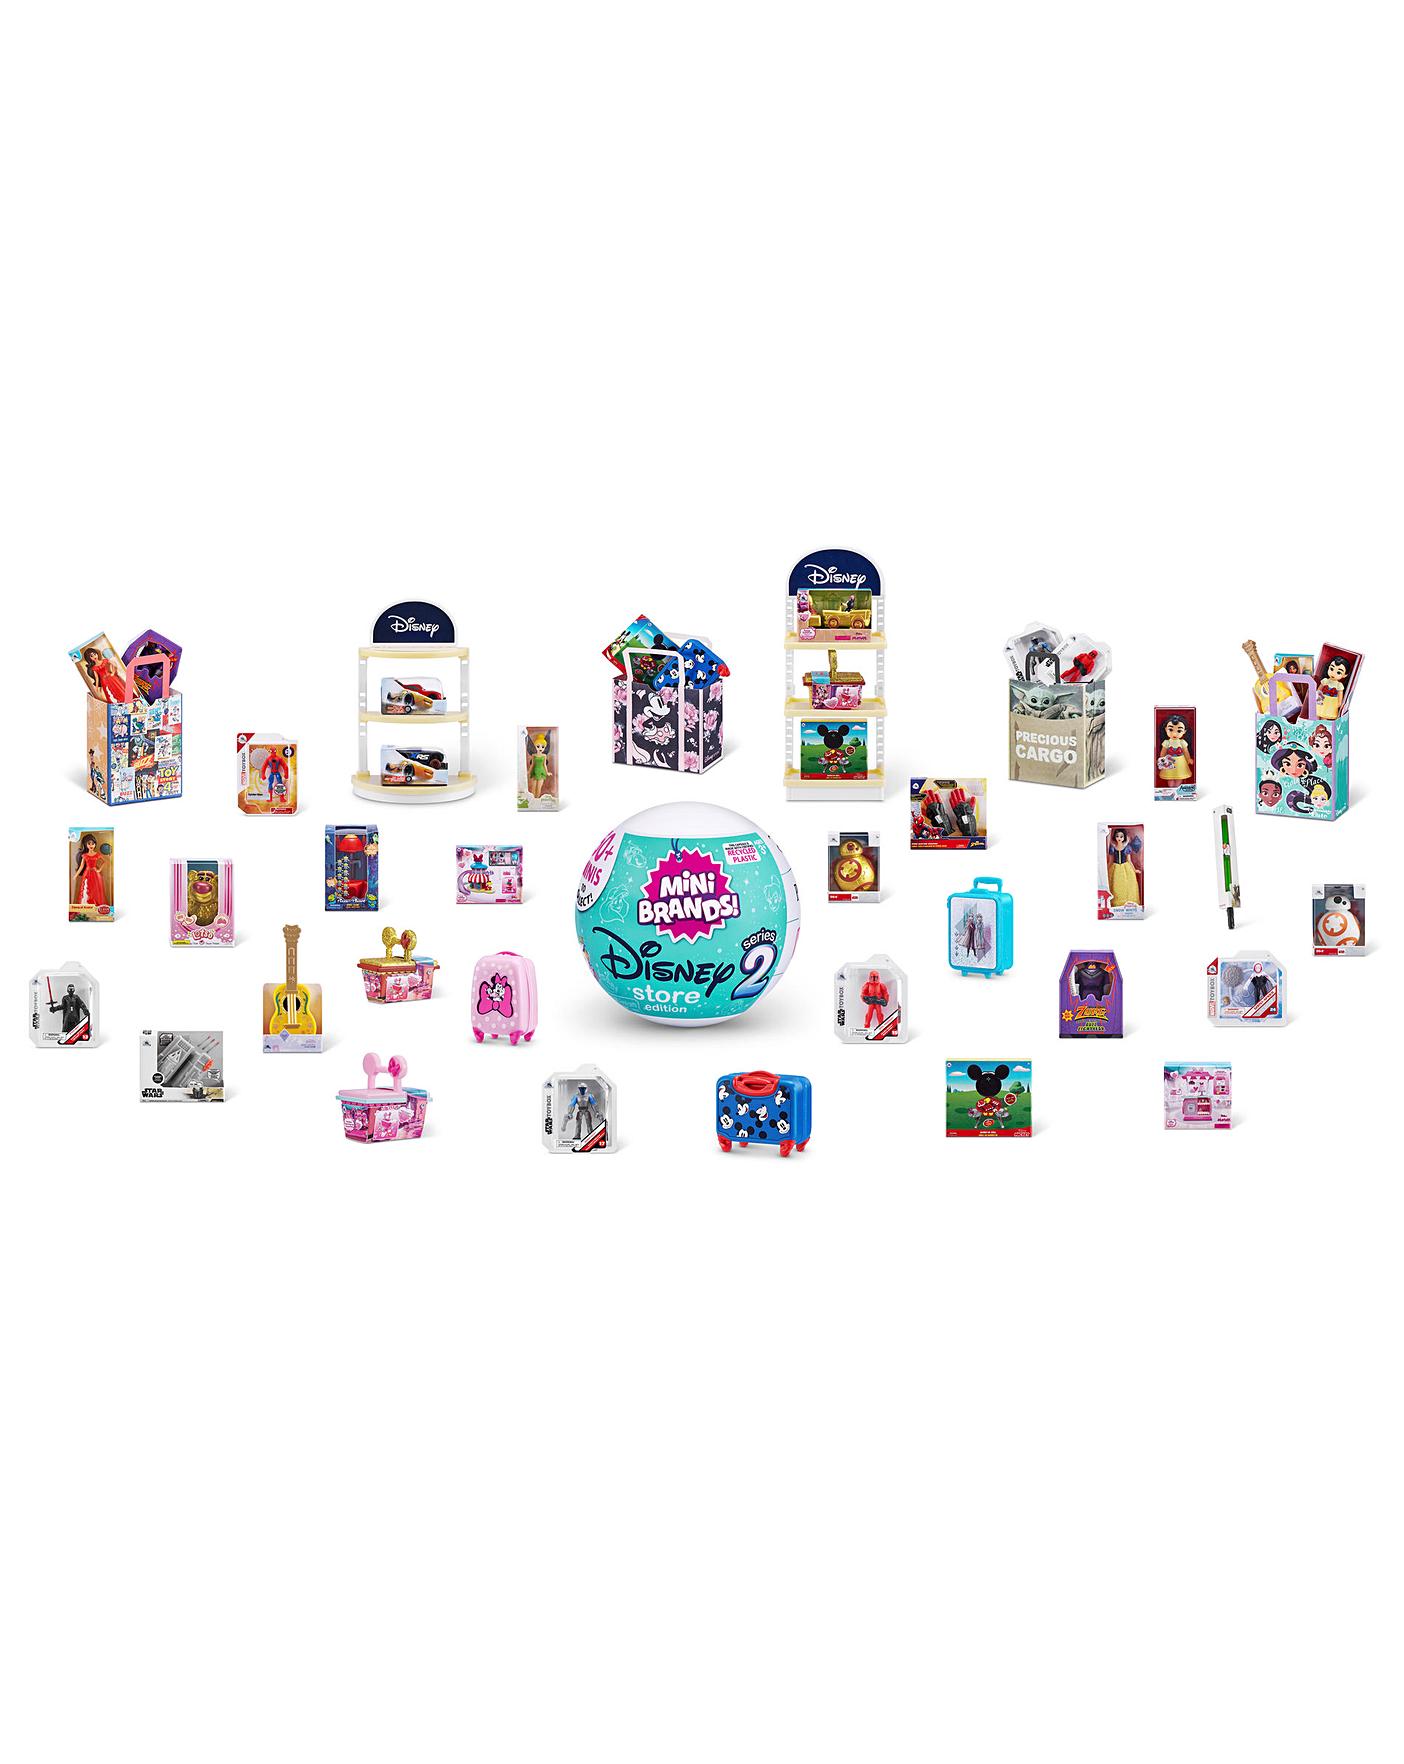 5 Surprise Mini Brands Series 3 - Mystery Brand Collectibles Made by Zuru -  2 Pack, Multicolor